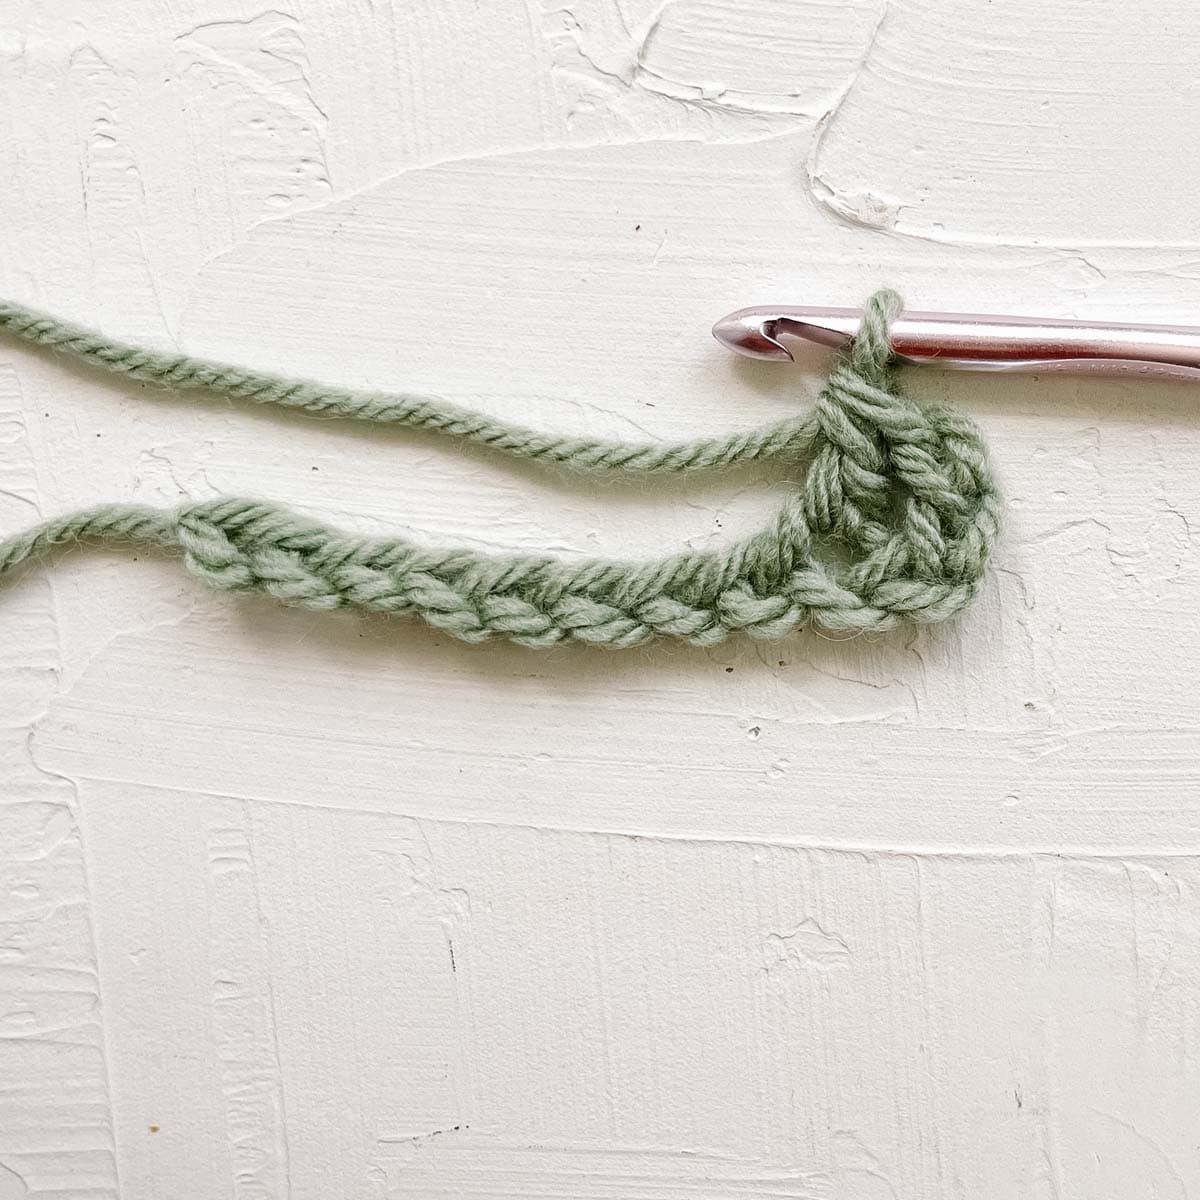 Double crochet step 4: Yarn over and pull through final two loops on hook.